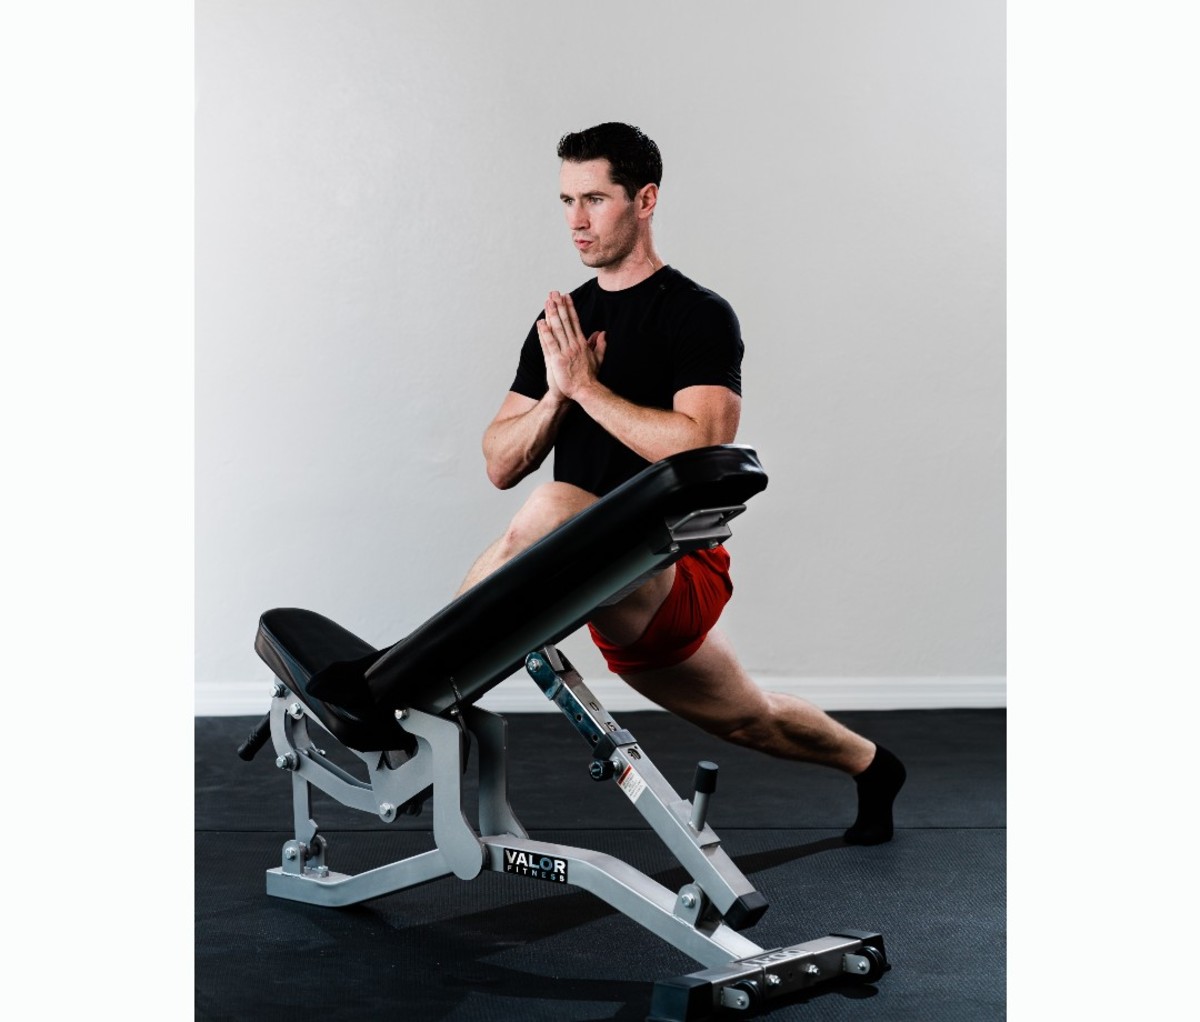 Caucasian man in black T-shirt and red shorts doing incline pigeon pose stretch on bench